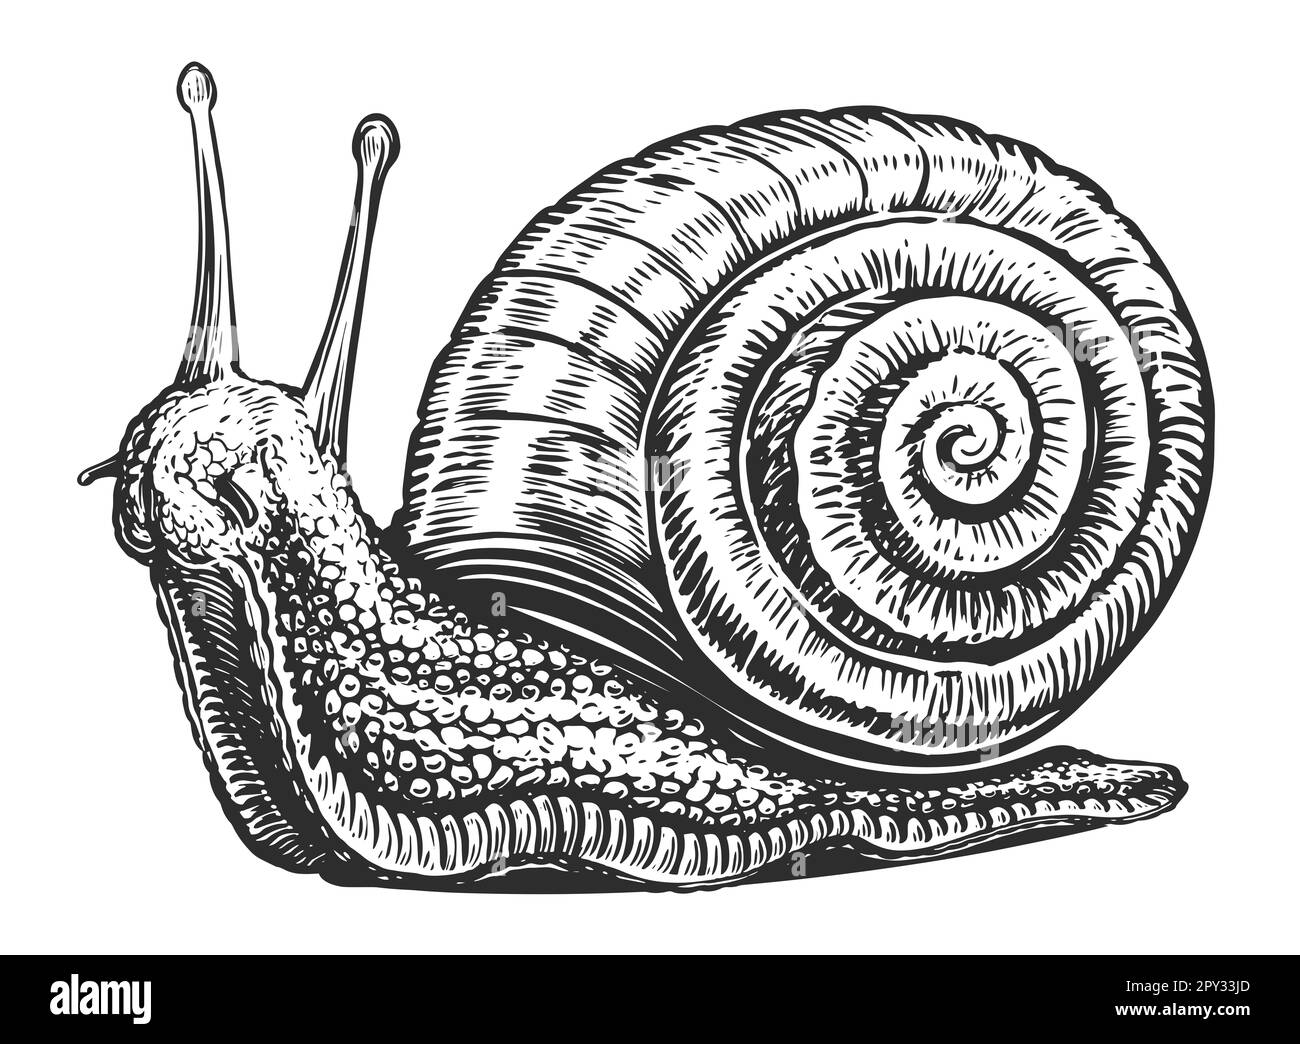 Snail with shell. Invertebrate animal in vintage engraving style. Hand drawn sketch illustration Stock Photo